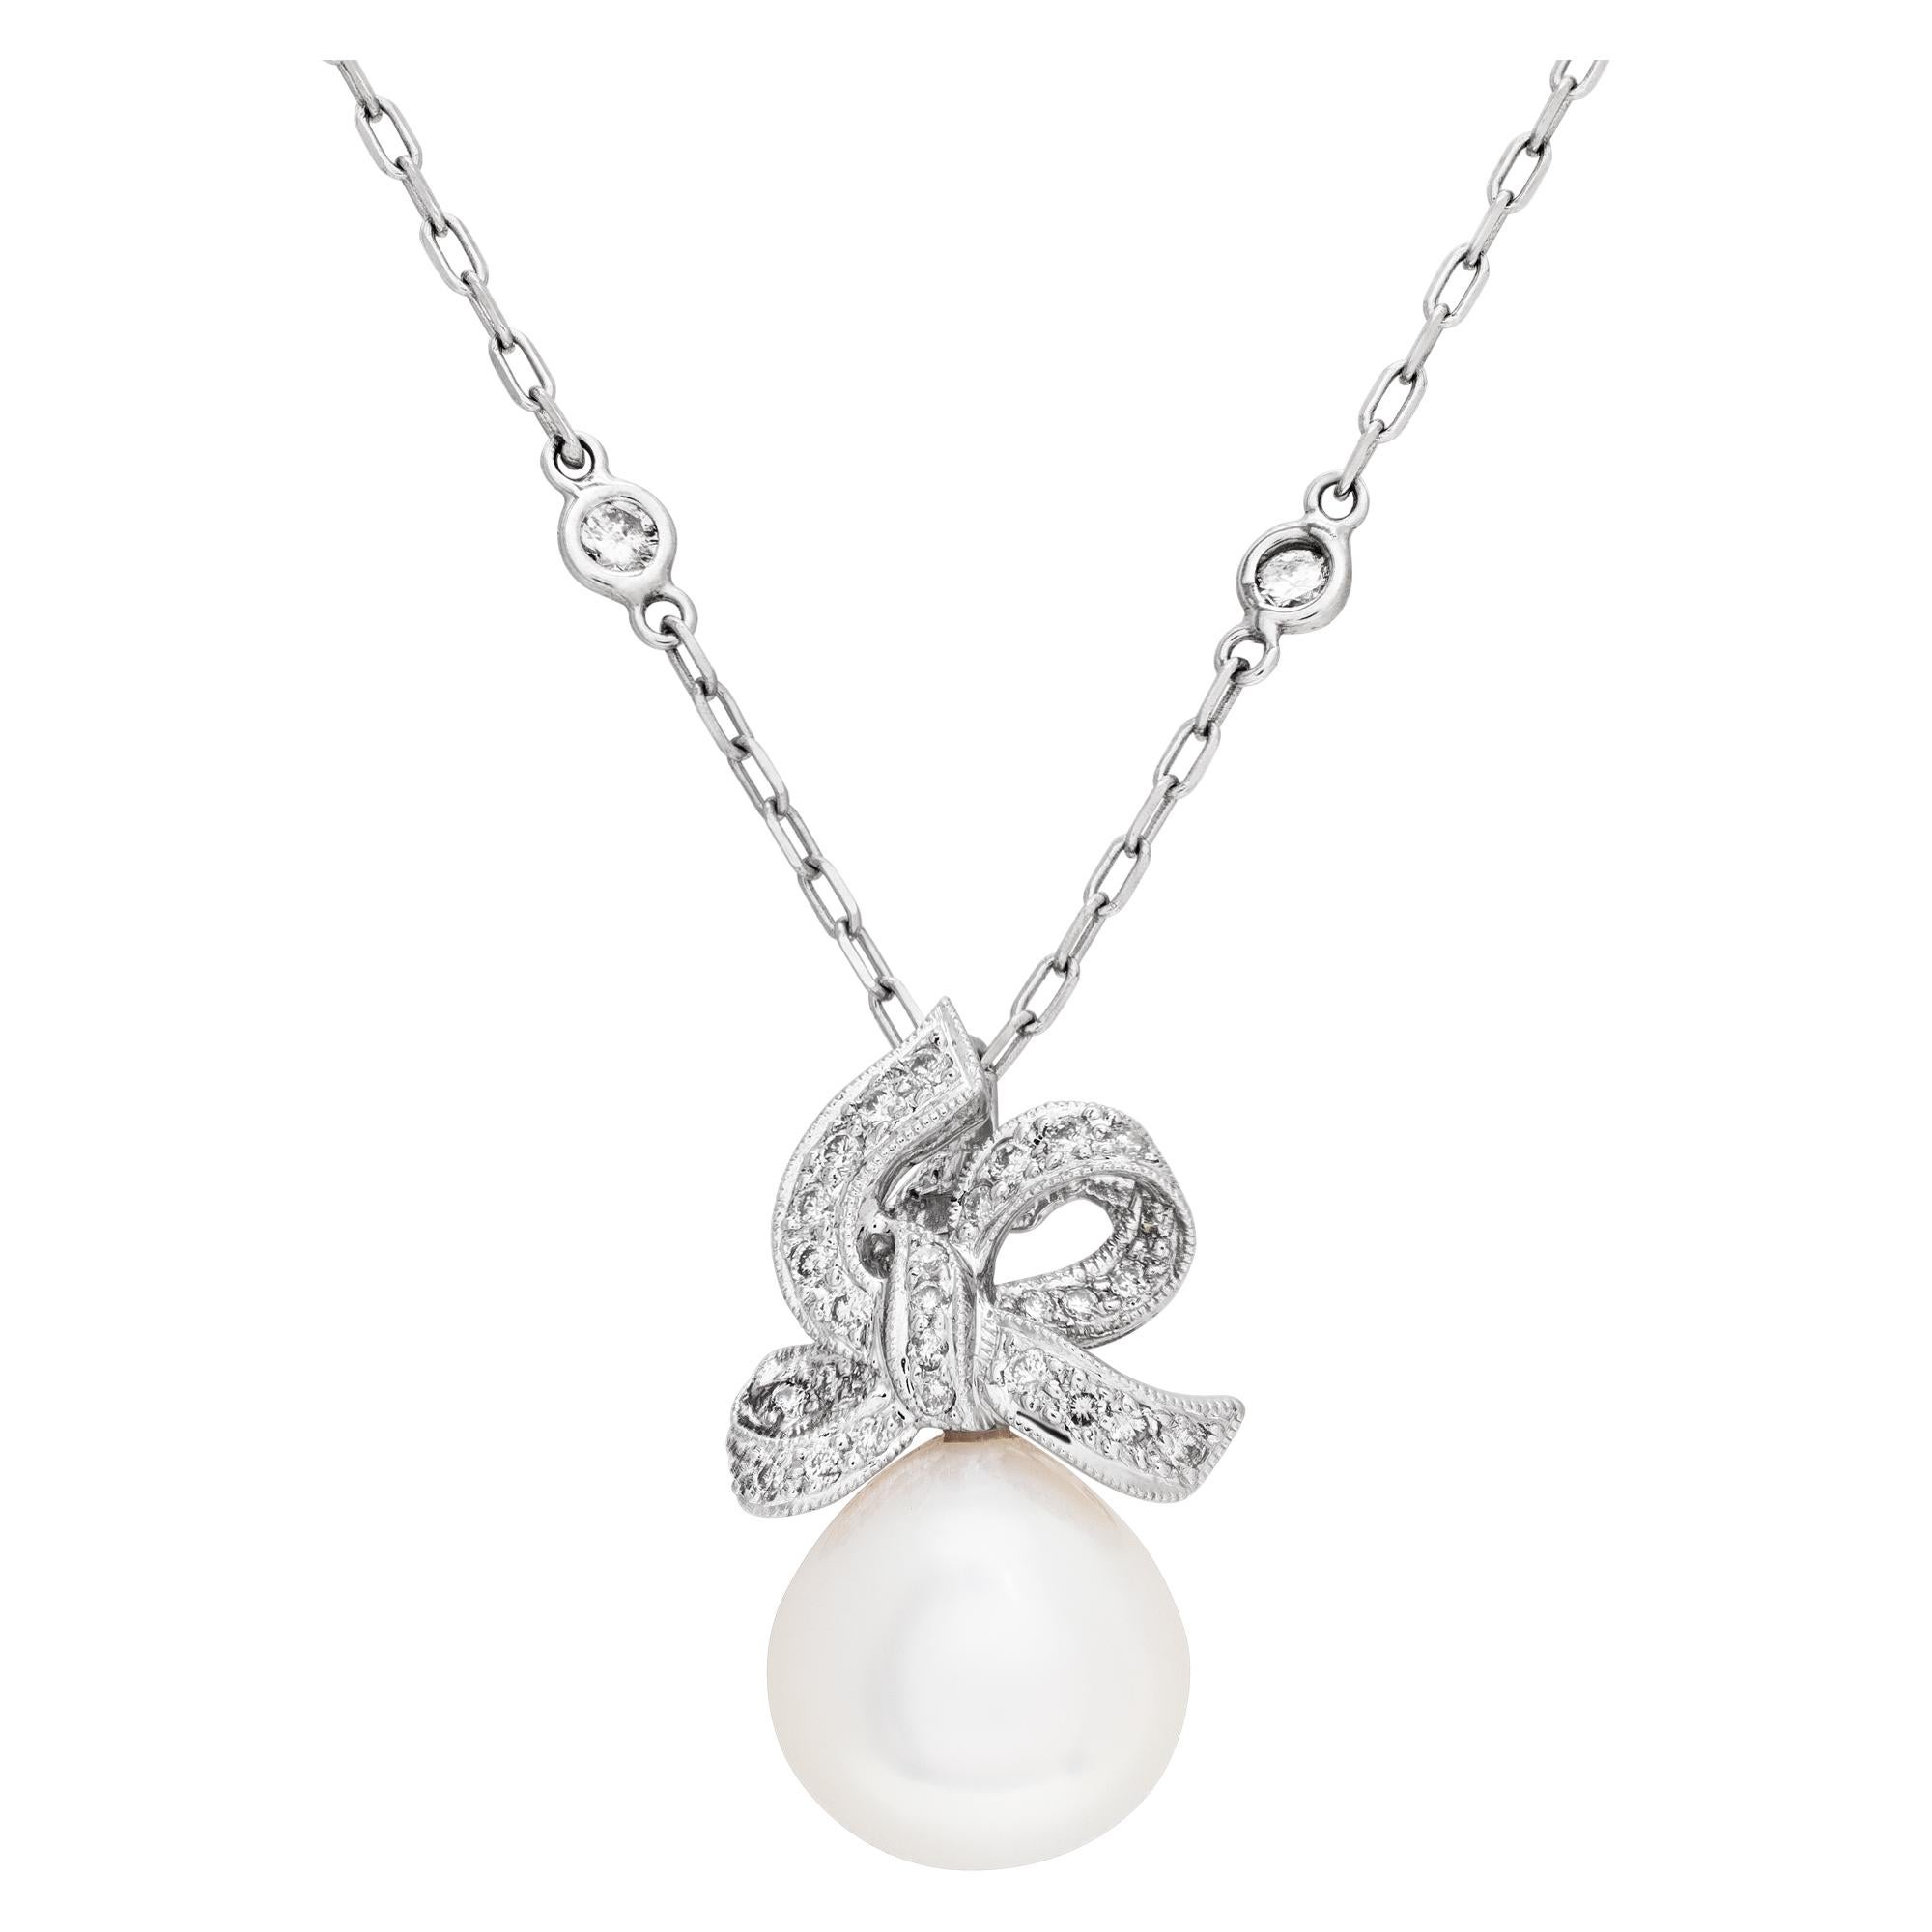 Pearl and diamond pendant in 18k white gold with 14k white gold diamonds by the yard chain. 12mm tear drop shaped pearl with silver overtone. Approximately 1.08 carats in round diamonds. 18 inch length.